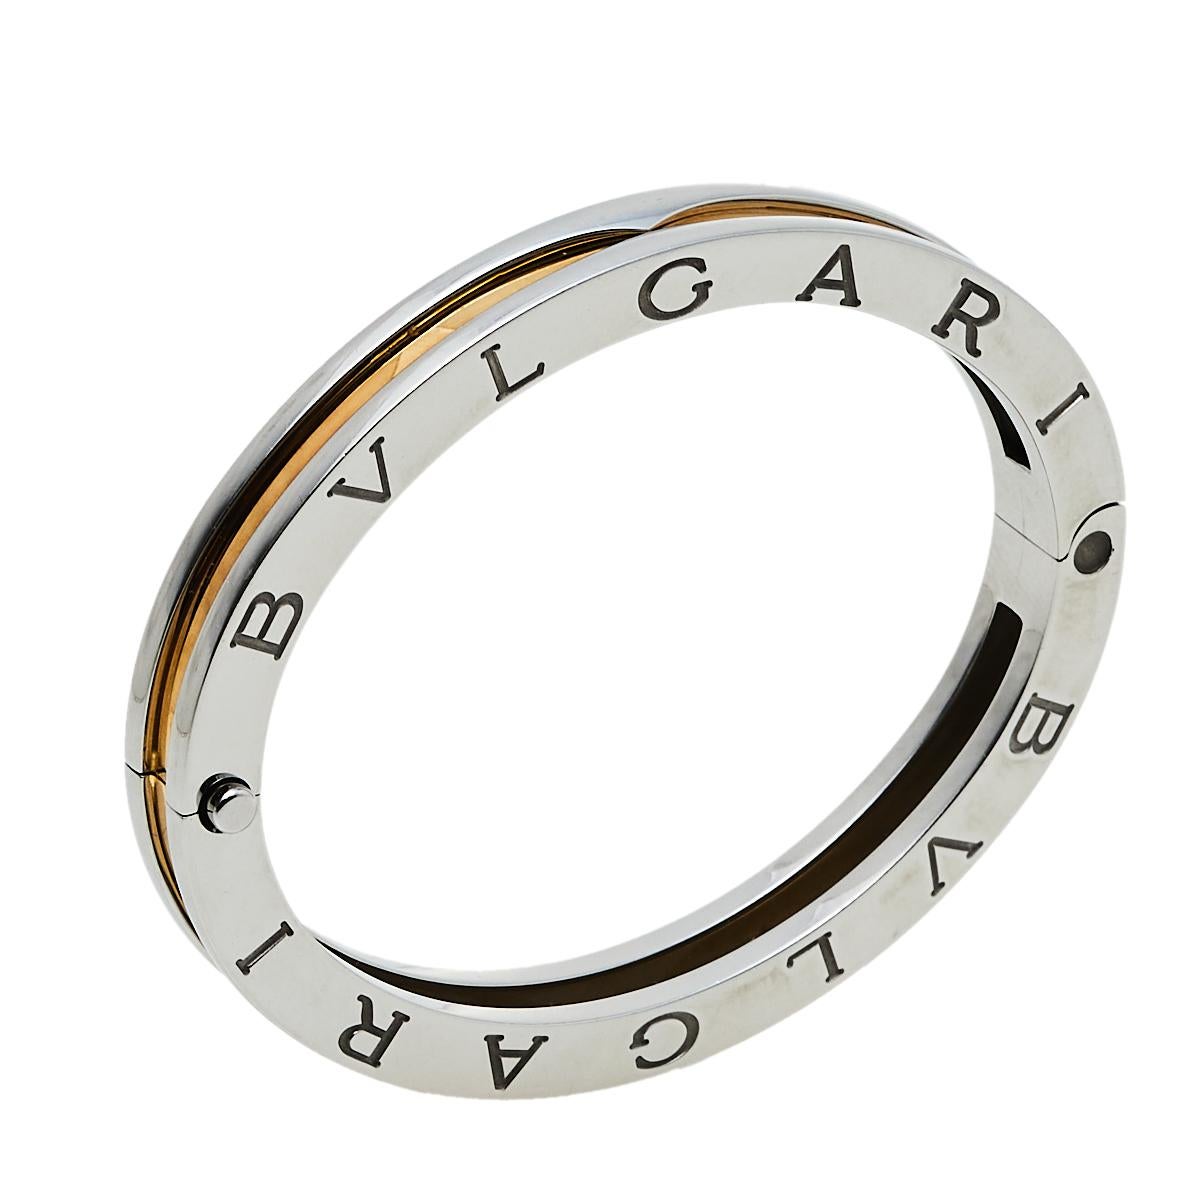 Adorn your wrist with this stunner of a bracelet from Bvlgari. The piece is from their B.Zero1 collection and has been crafted from stainless steel and beautifully lined with 18k rose gold. It is complete with the brand's lettering on the contours.